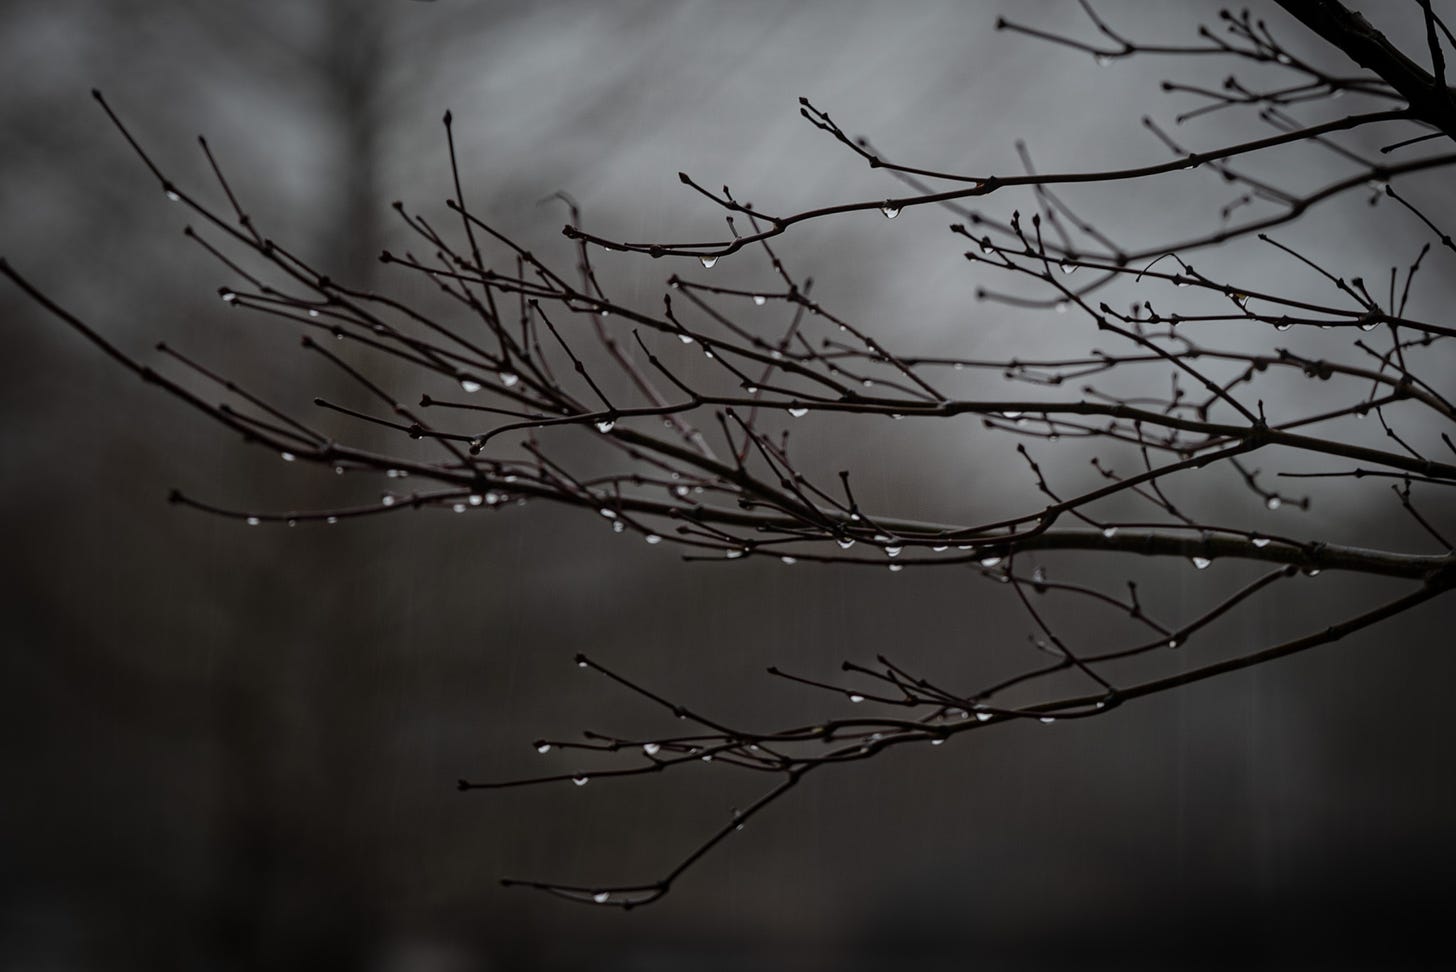 A sectron of bare branches dripping with morning dew with a blurred background